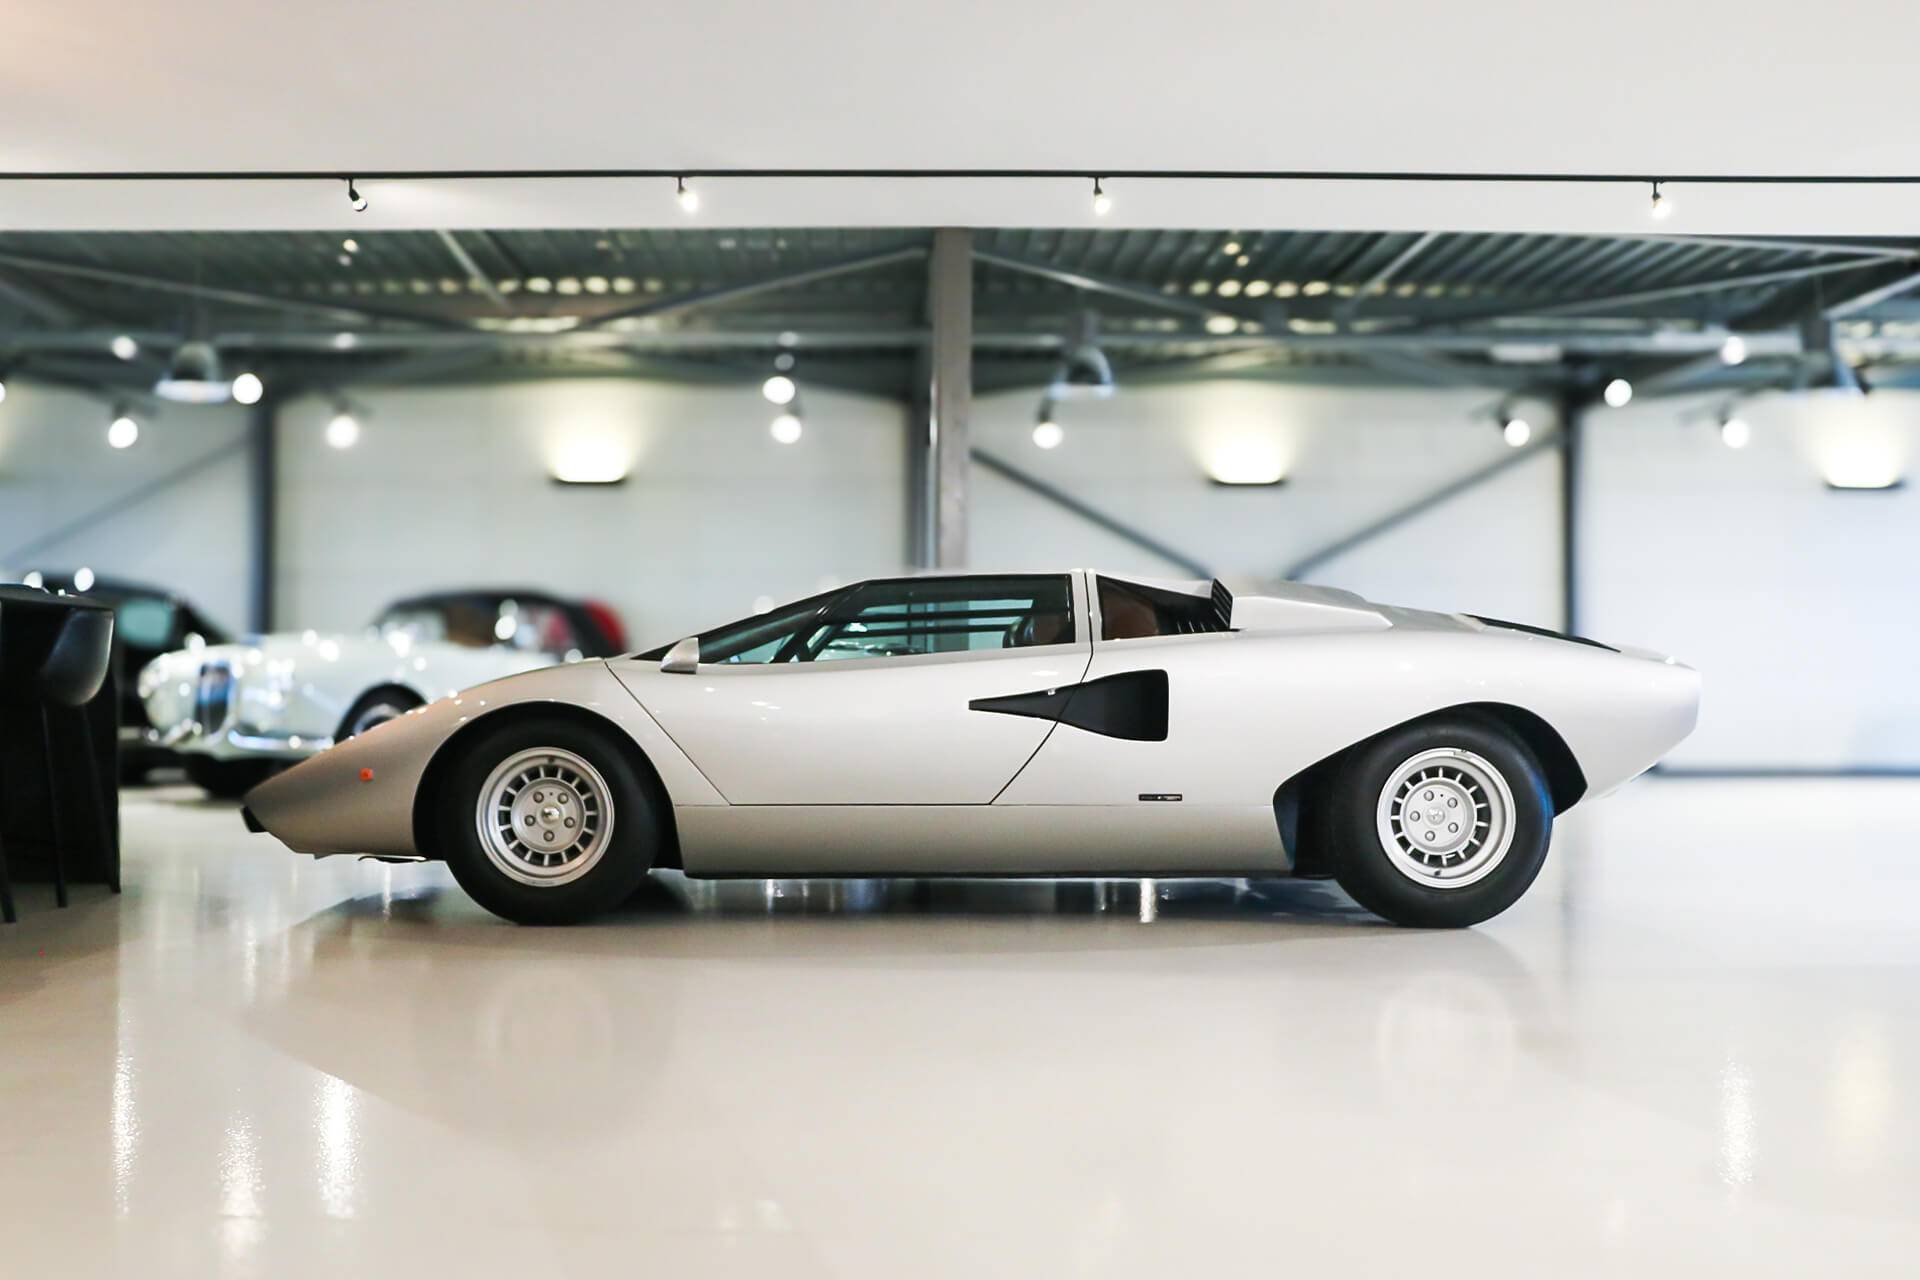 For Sale: Lamborghini Countach LP 400 (1975) offered for Price on request